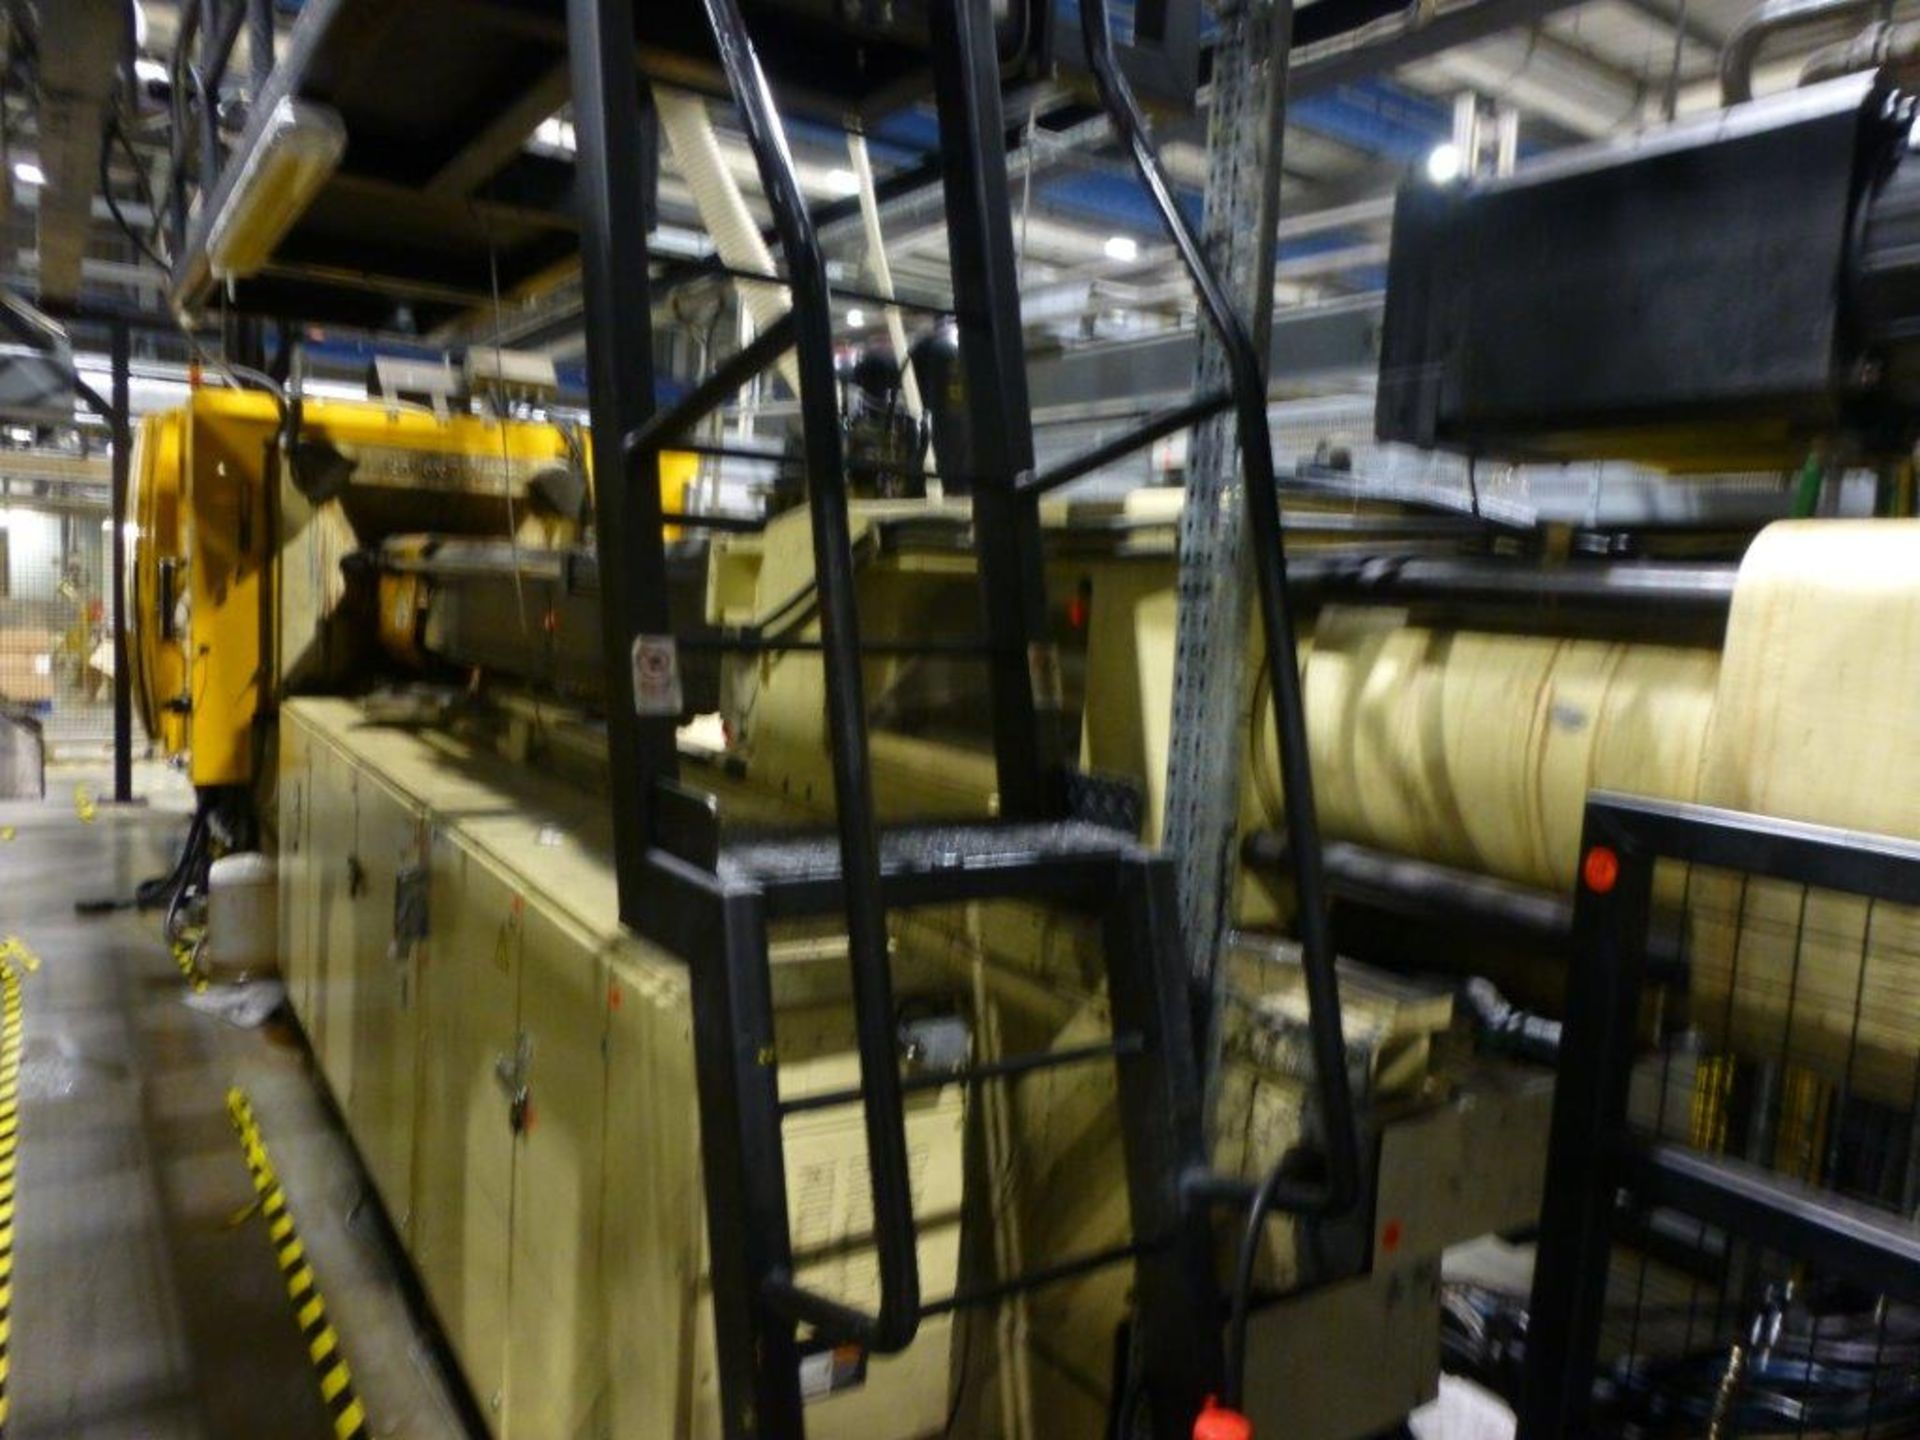 Husky H400 RS115 100 CNC plastic injection moulding machine Serial No. 2640104 (2003) with 400 tonne - Image 2 of 5